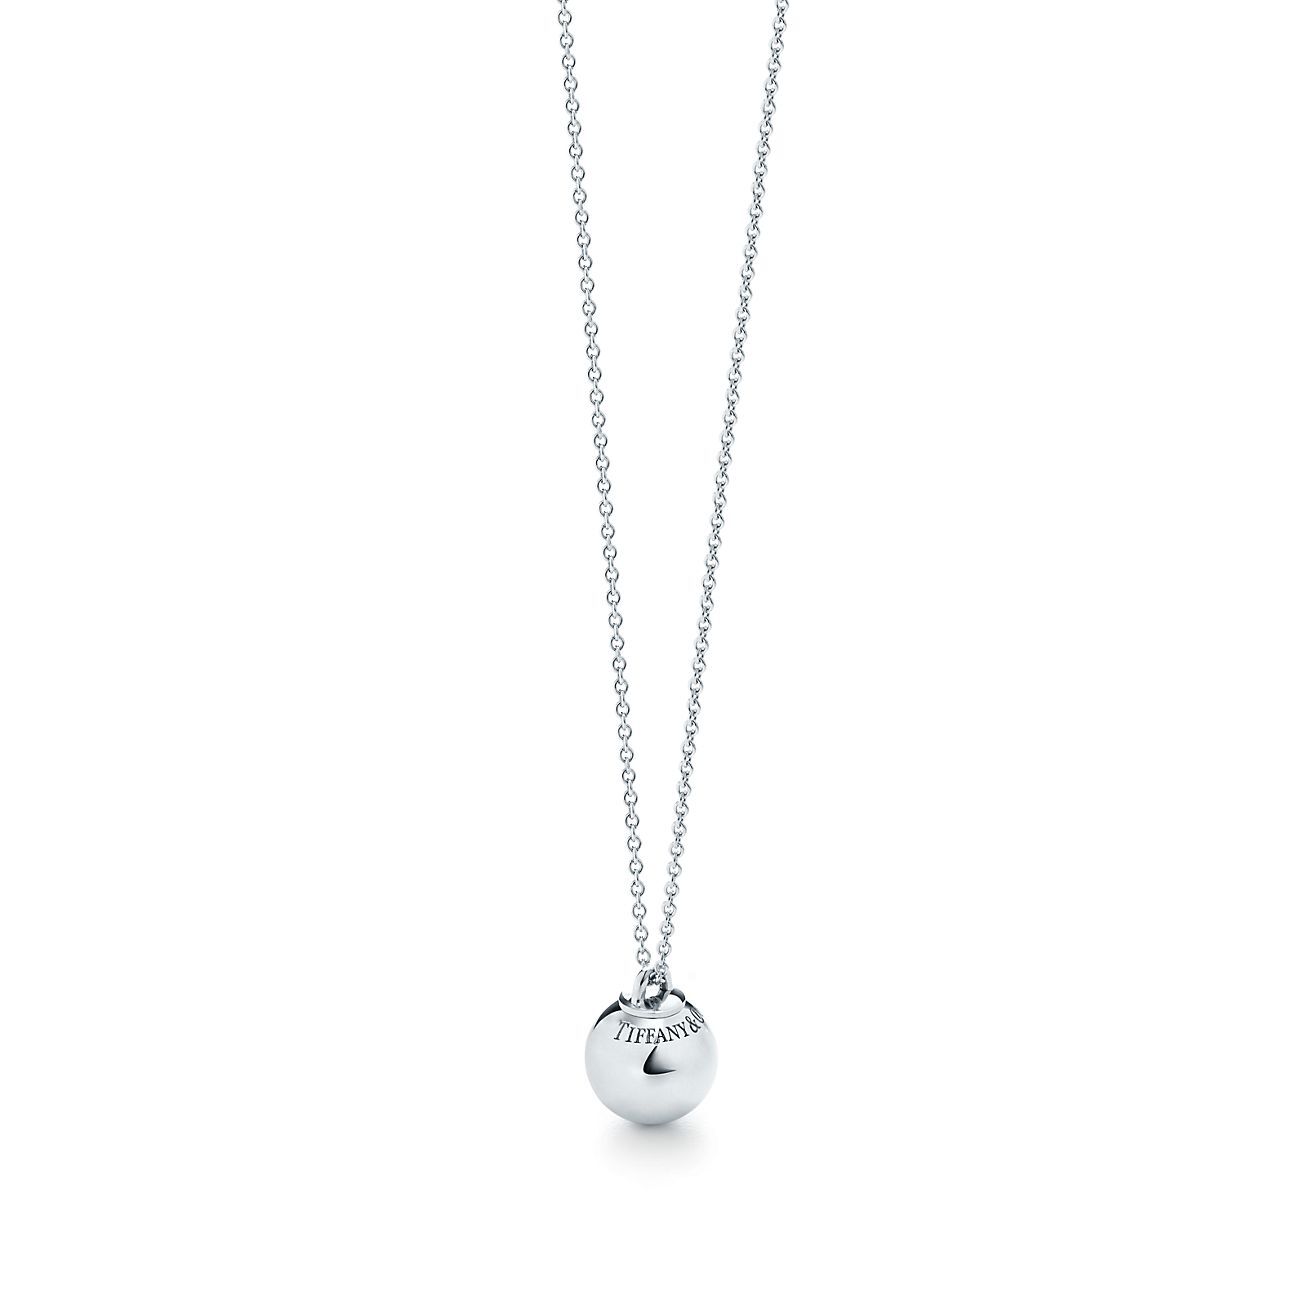 Silver Necklace Tiffany & Co - One size, buy pre-owned at 200 EUR